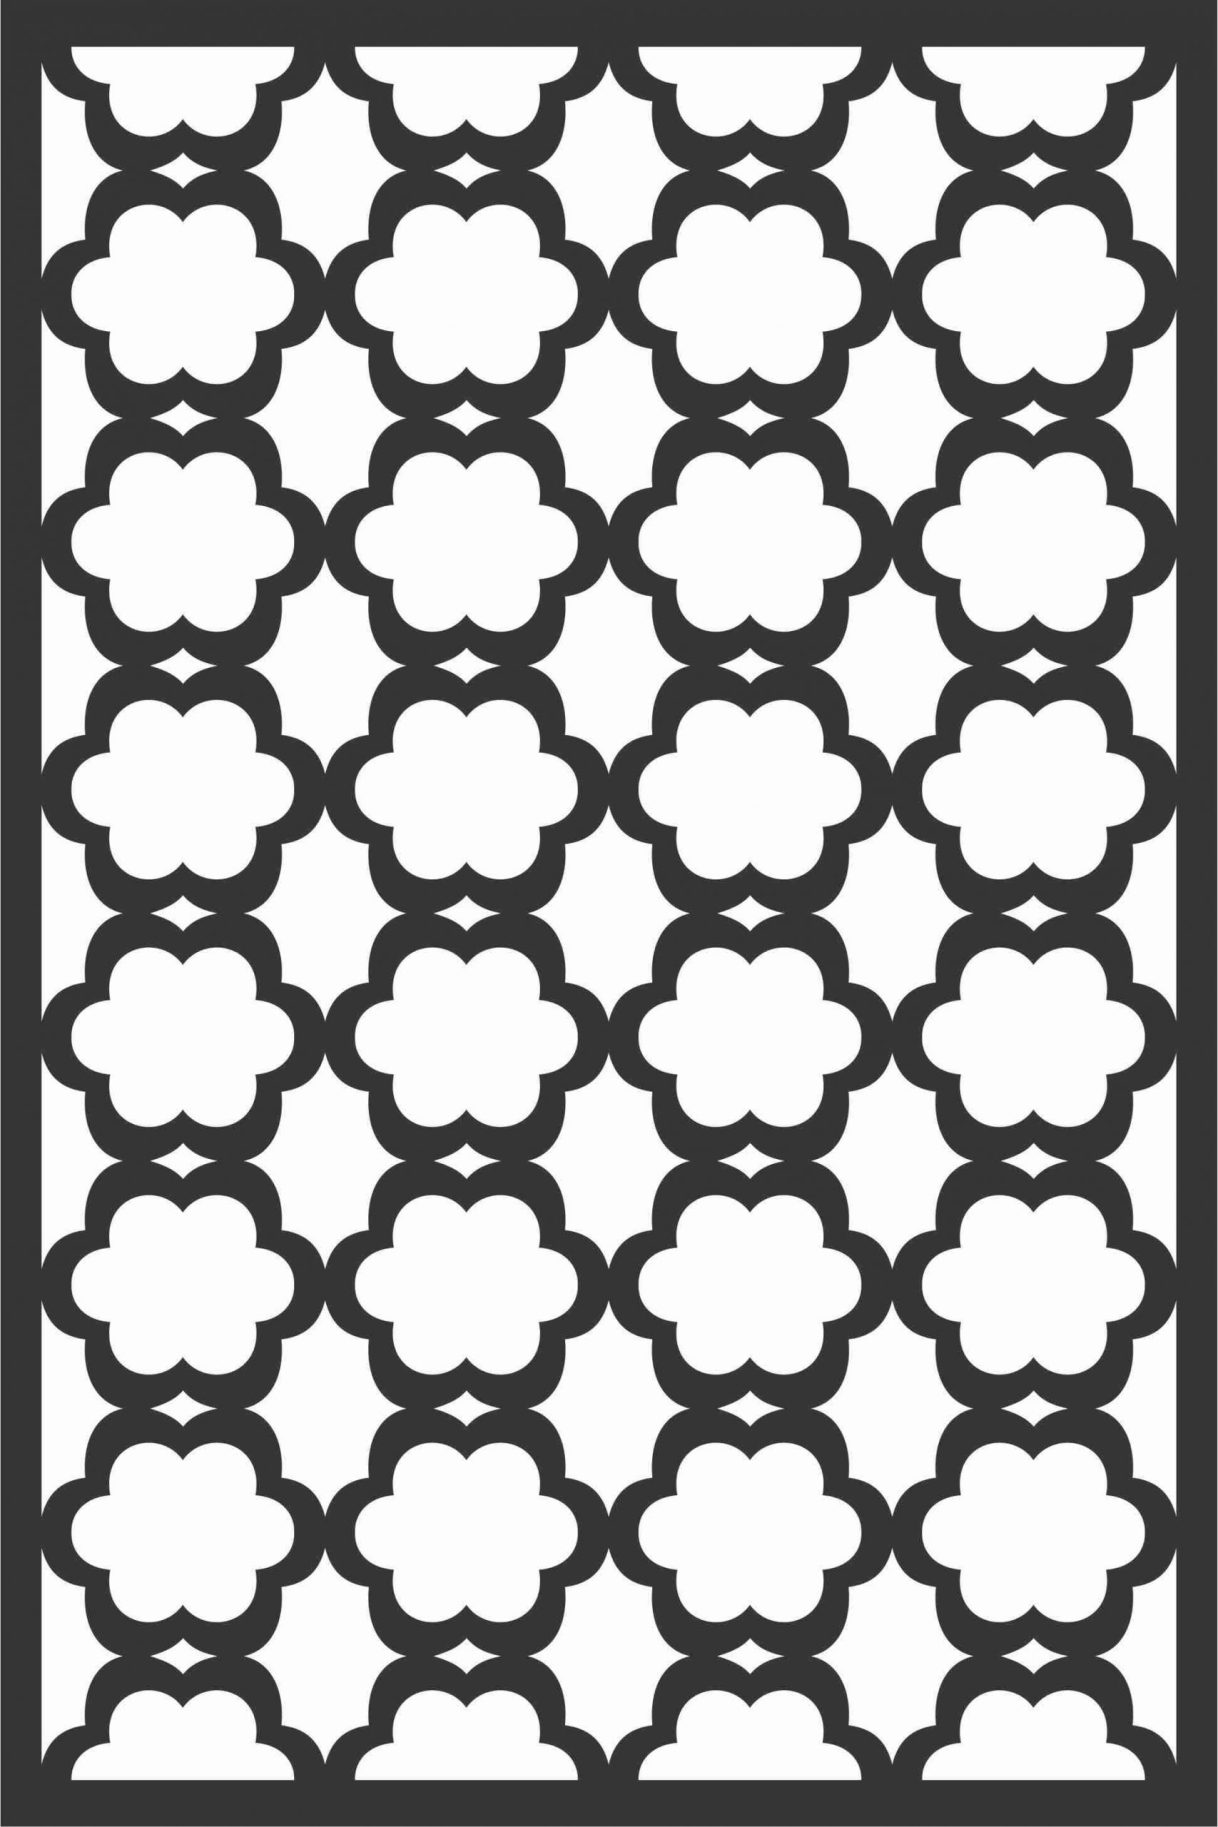 Floral Screen Patterns Design 71 Free DXF File